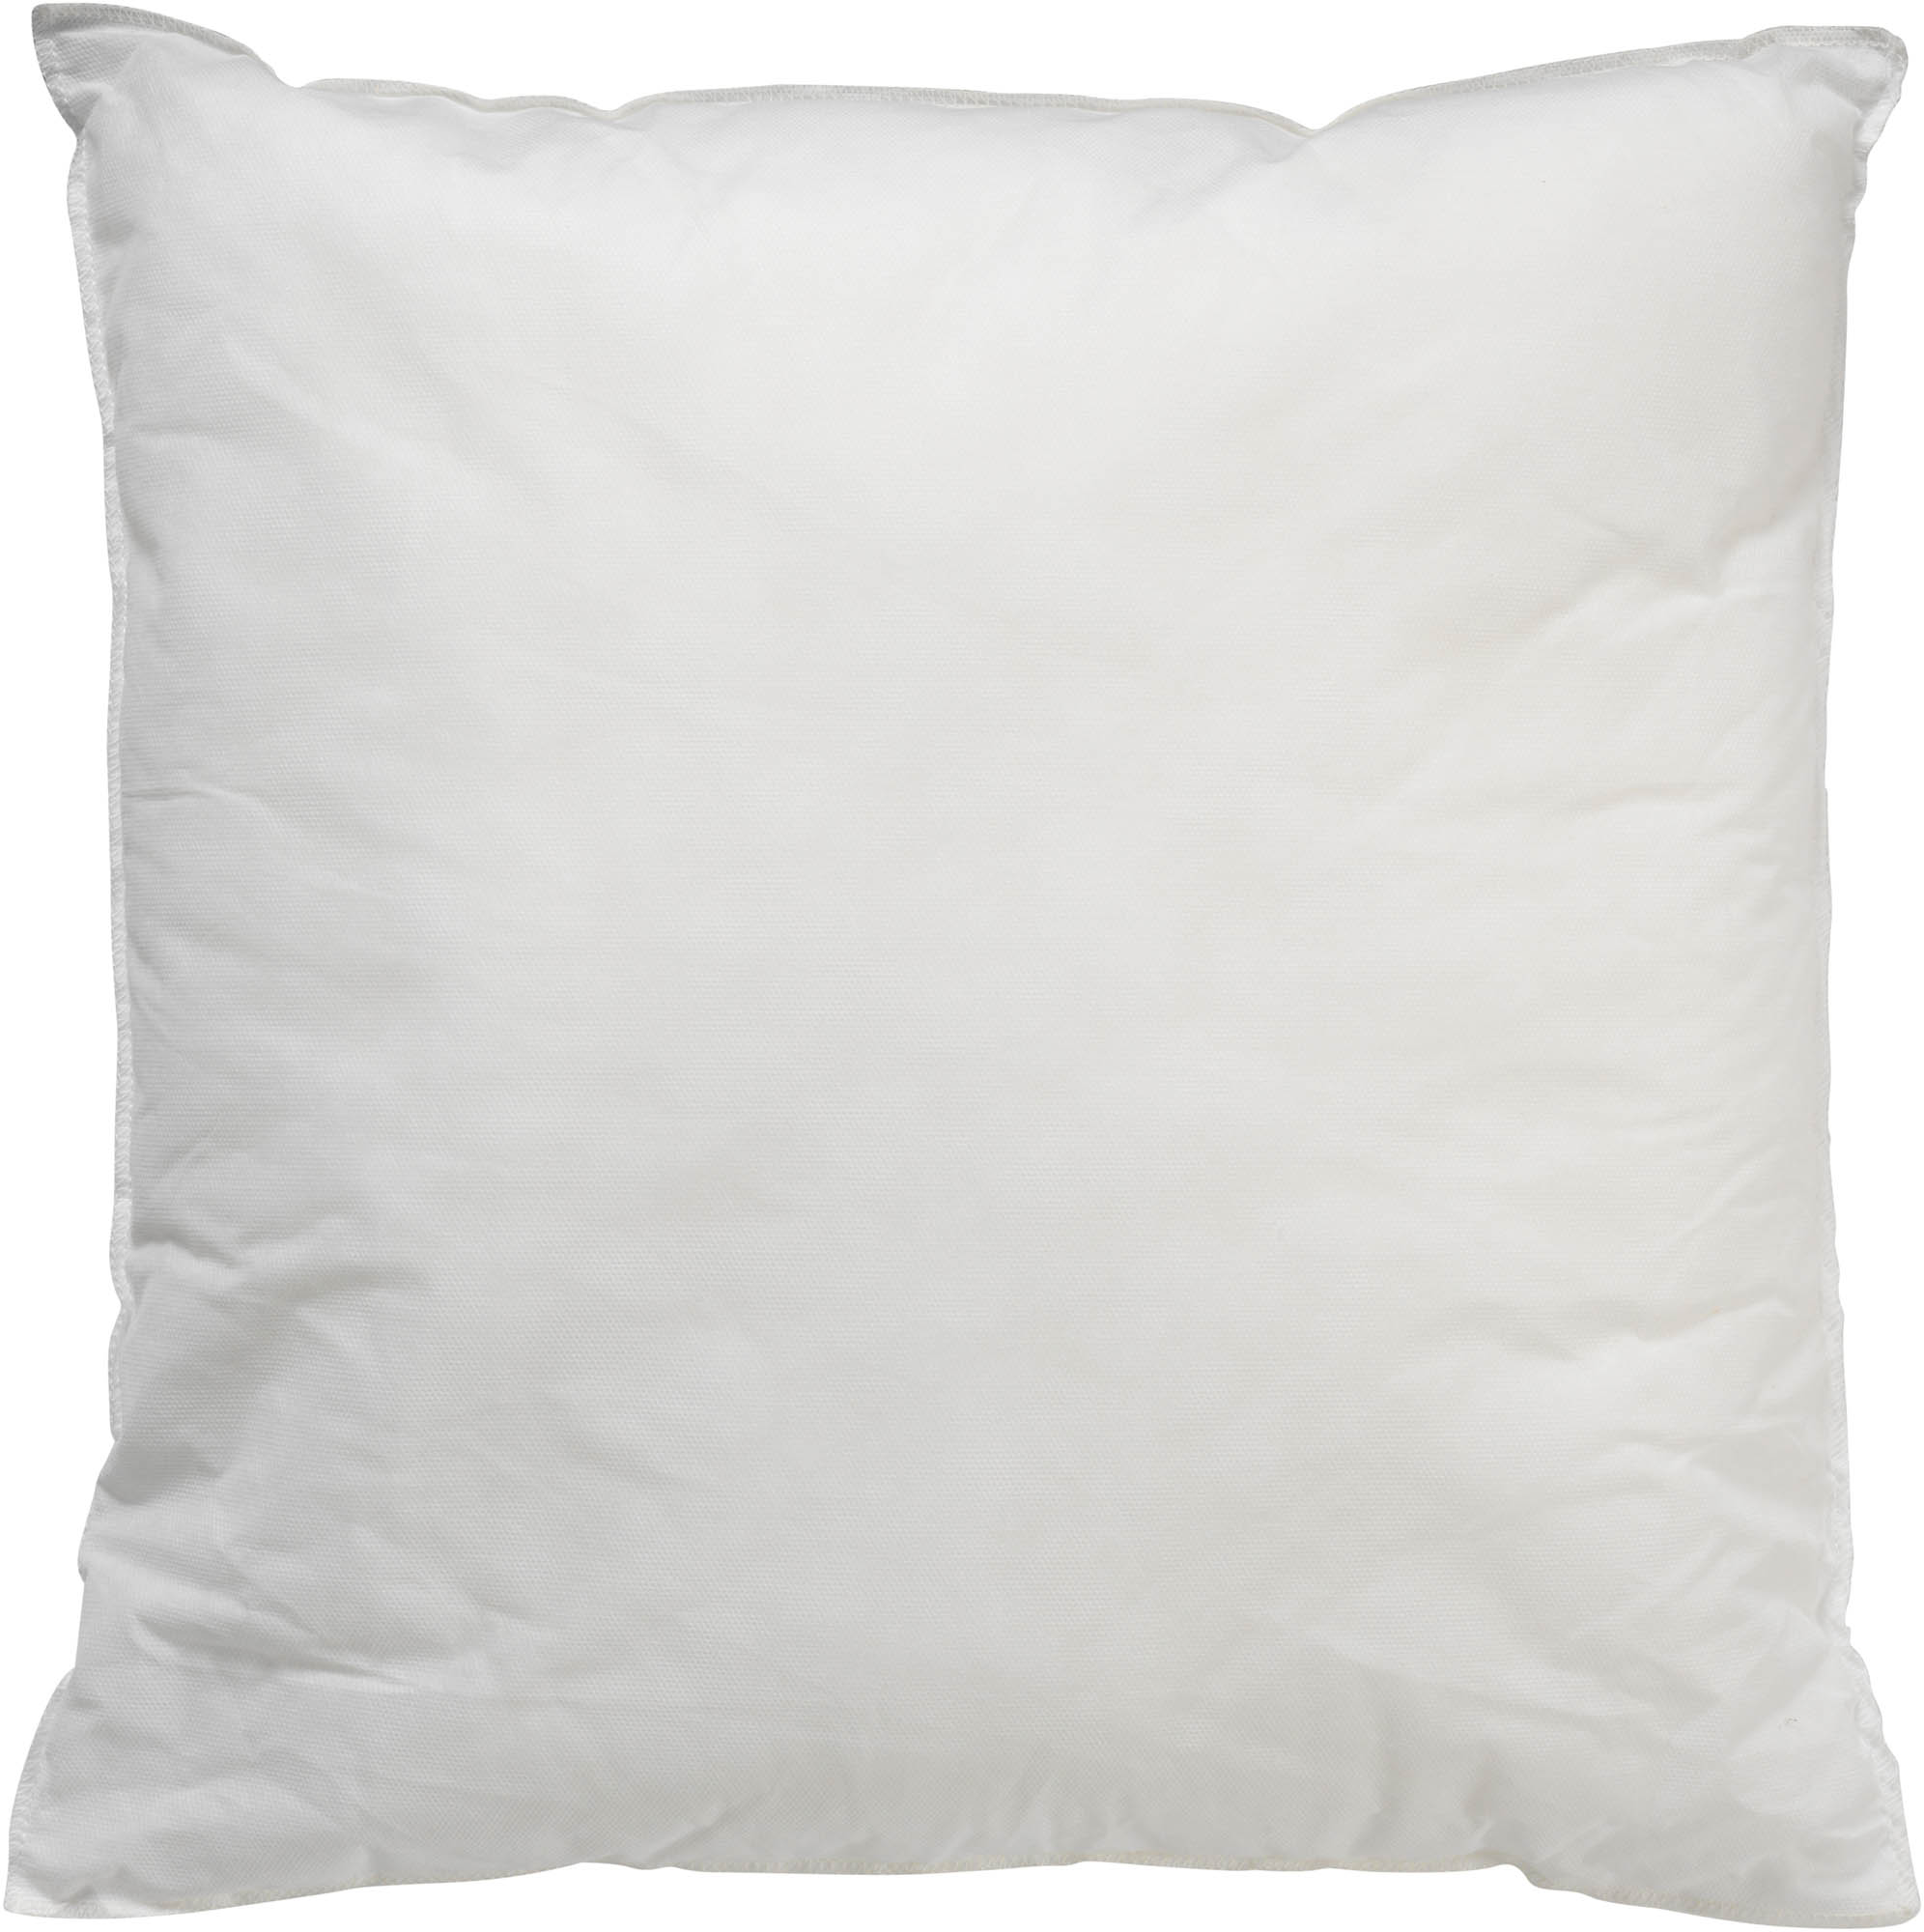 Inner cushion 45x45 cm with polyester filling 315 gram